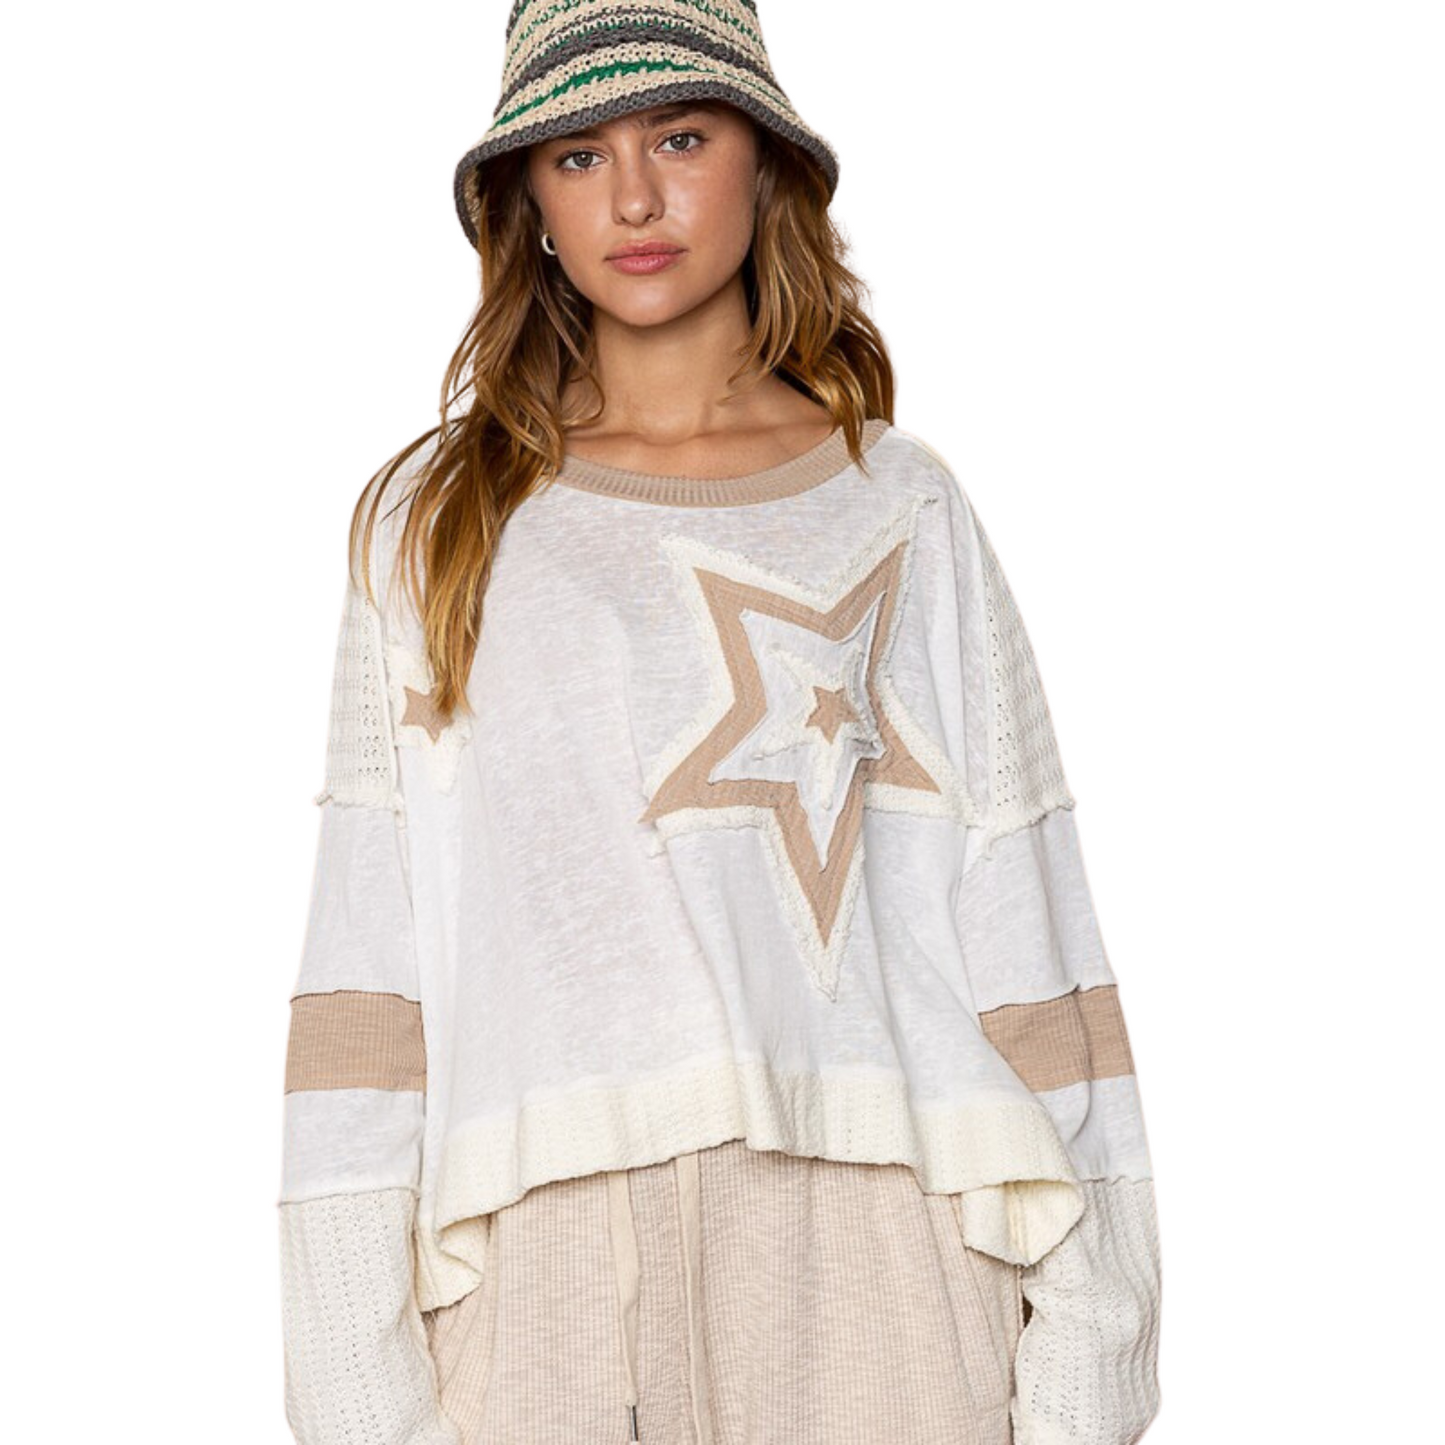 This Star Patch Cropped Knit Top is perfect for any casual occasion. Expertly designed with a round-neckline oversized fit and a cropped body length with long sleeves, this knit top is made from 100% cotton for comfort. The star shape patch-work adds a stylish touch, while the ivory color makes for a timeless look.